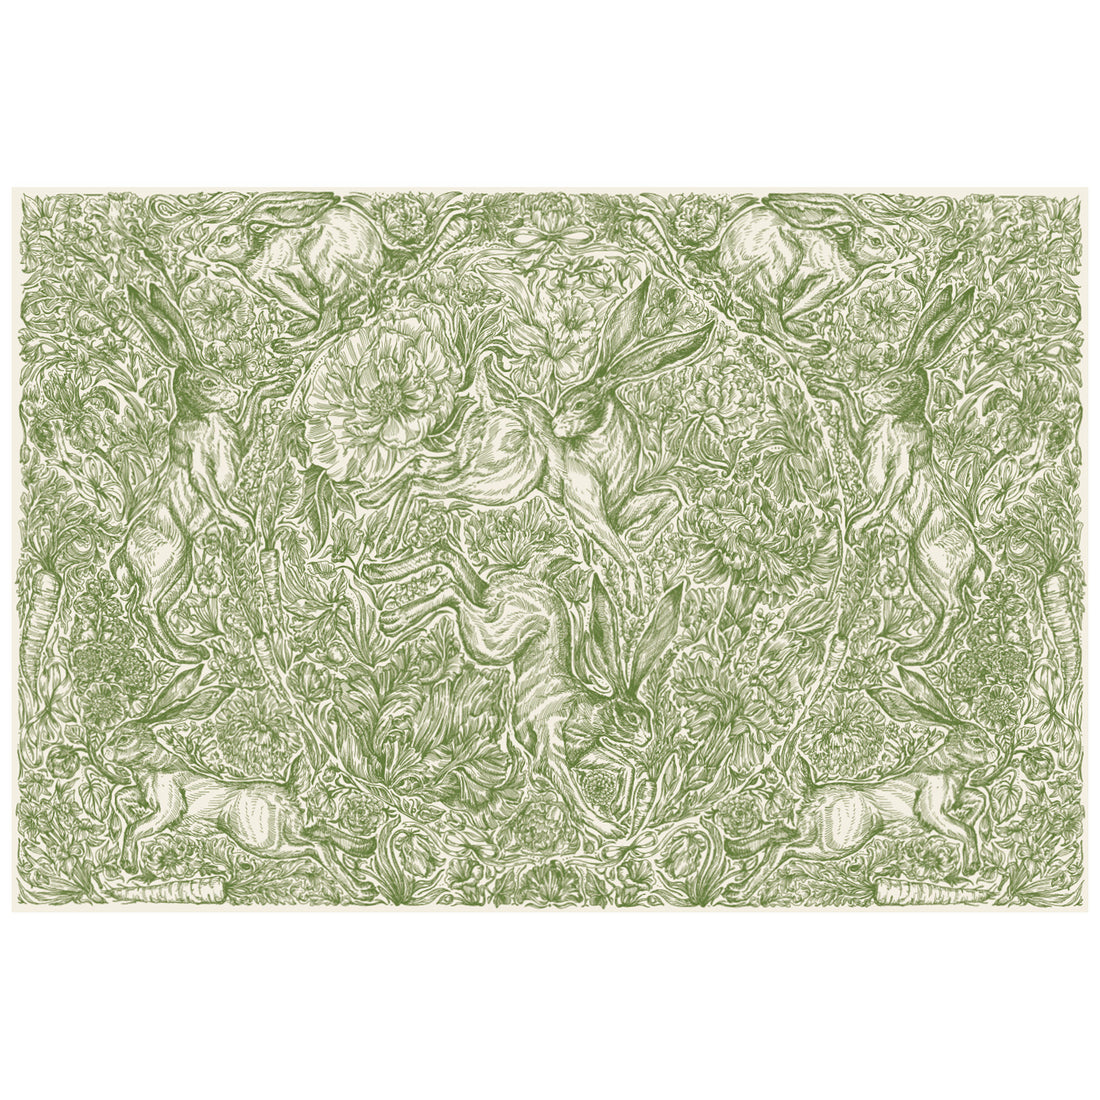 A densely-packed illustration of rabbits, flowers, carrots and foliage, in medium green over white.